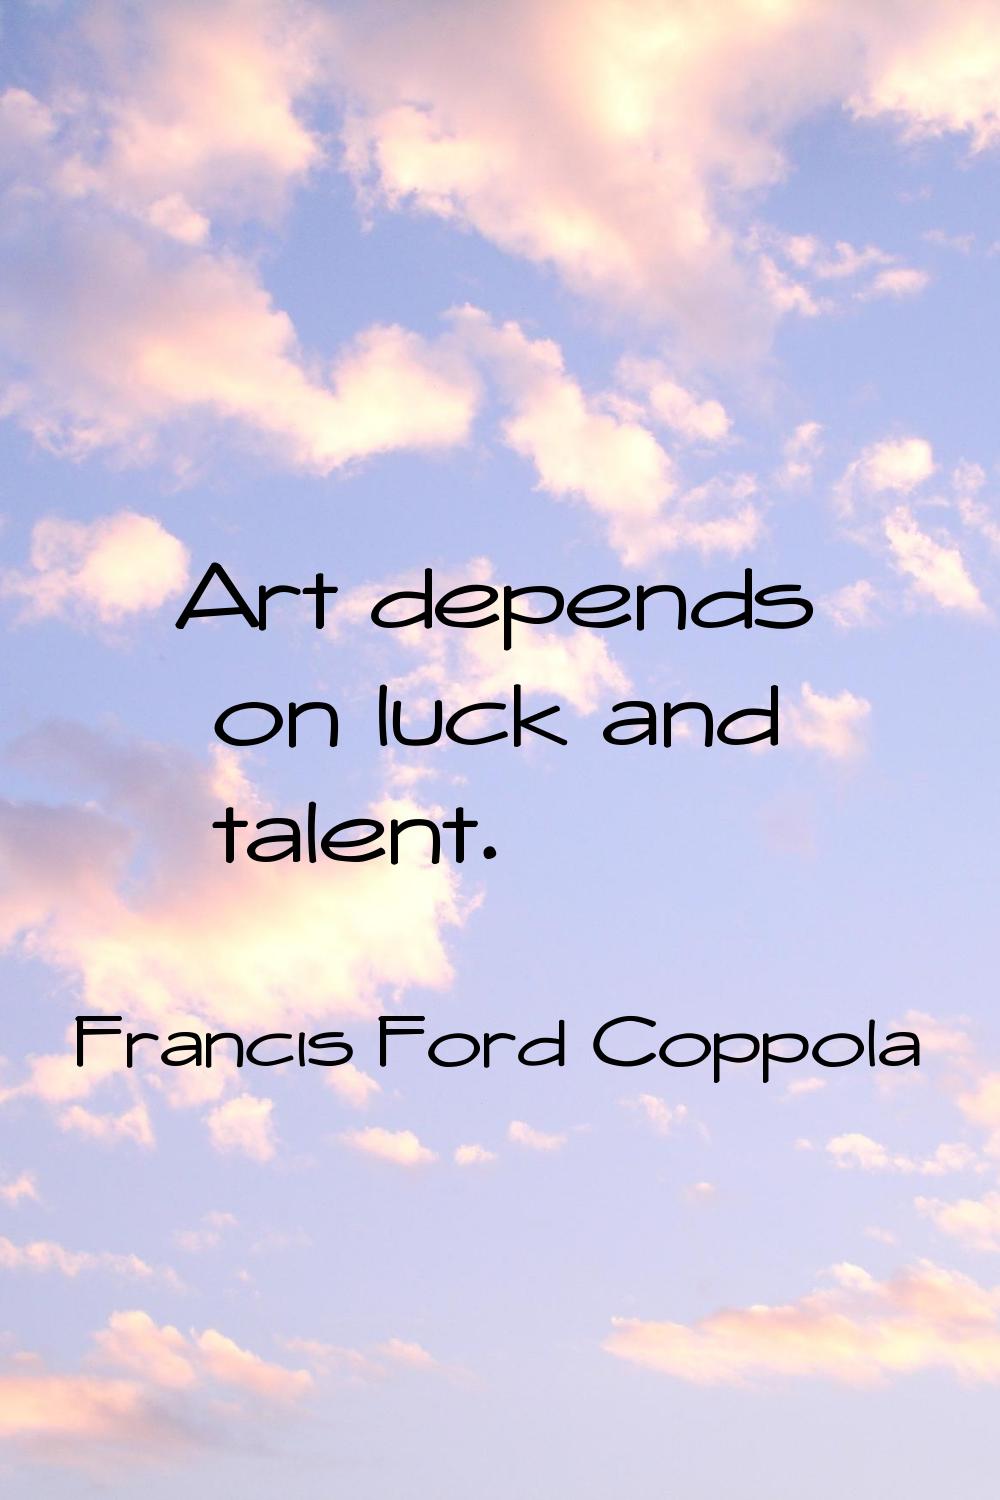 Art depends on luck and talent.